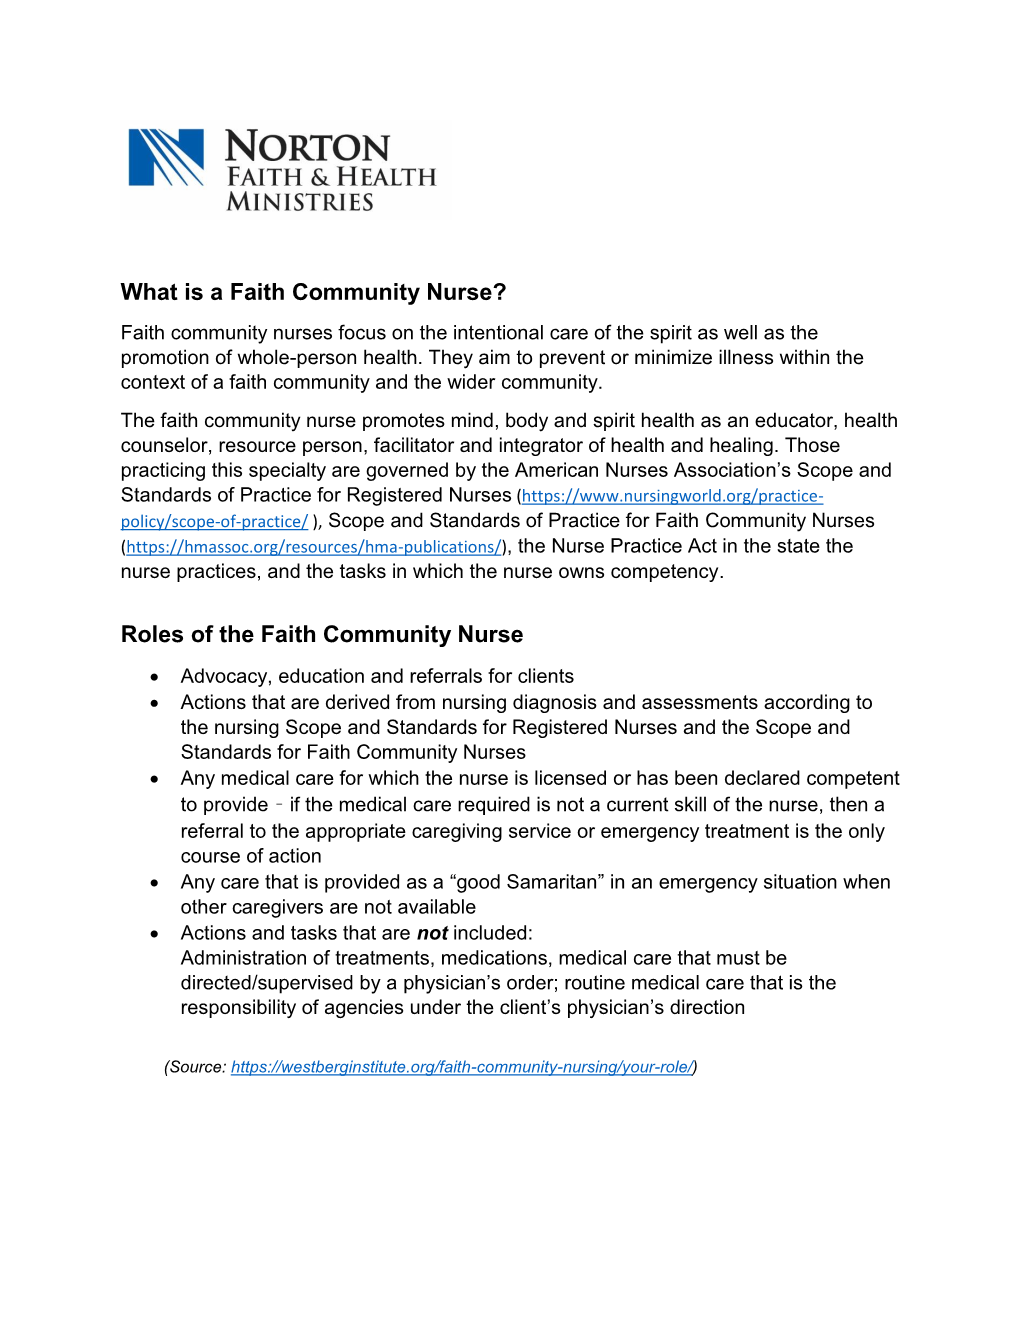 What Is a Faith Community Nurse? Faith Community Nurses Focus on the Intentional Care of the Spirit As Well As the Promotion of Whole-Person Health